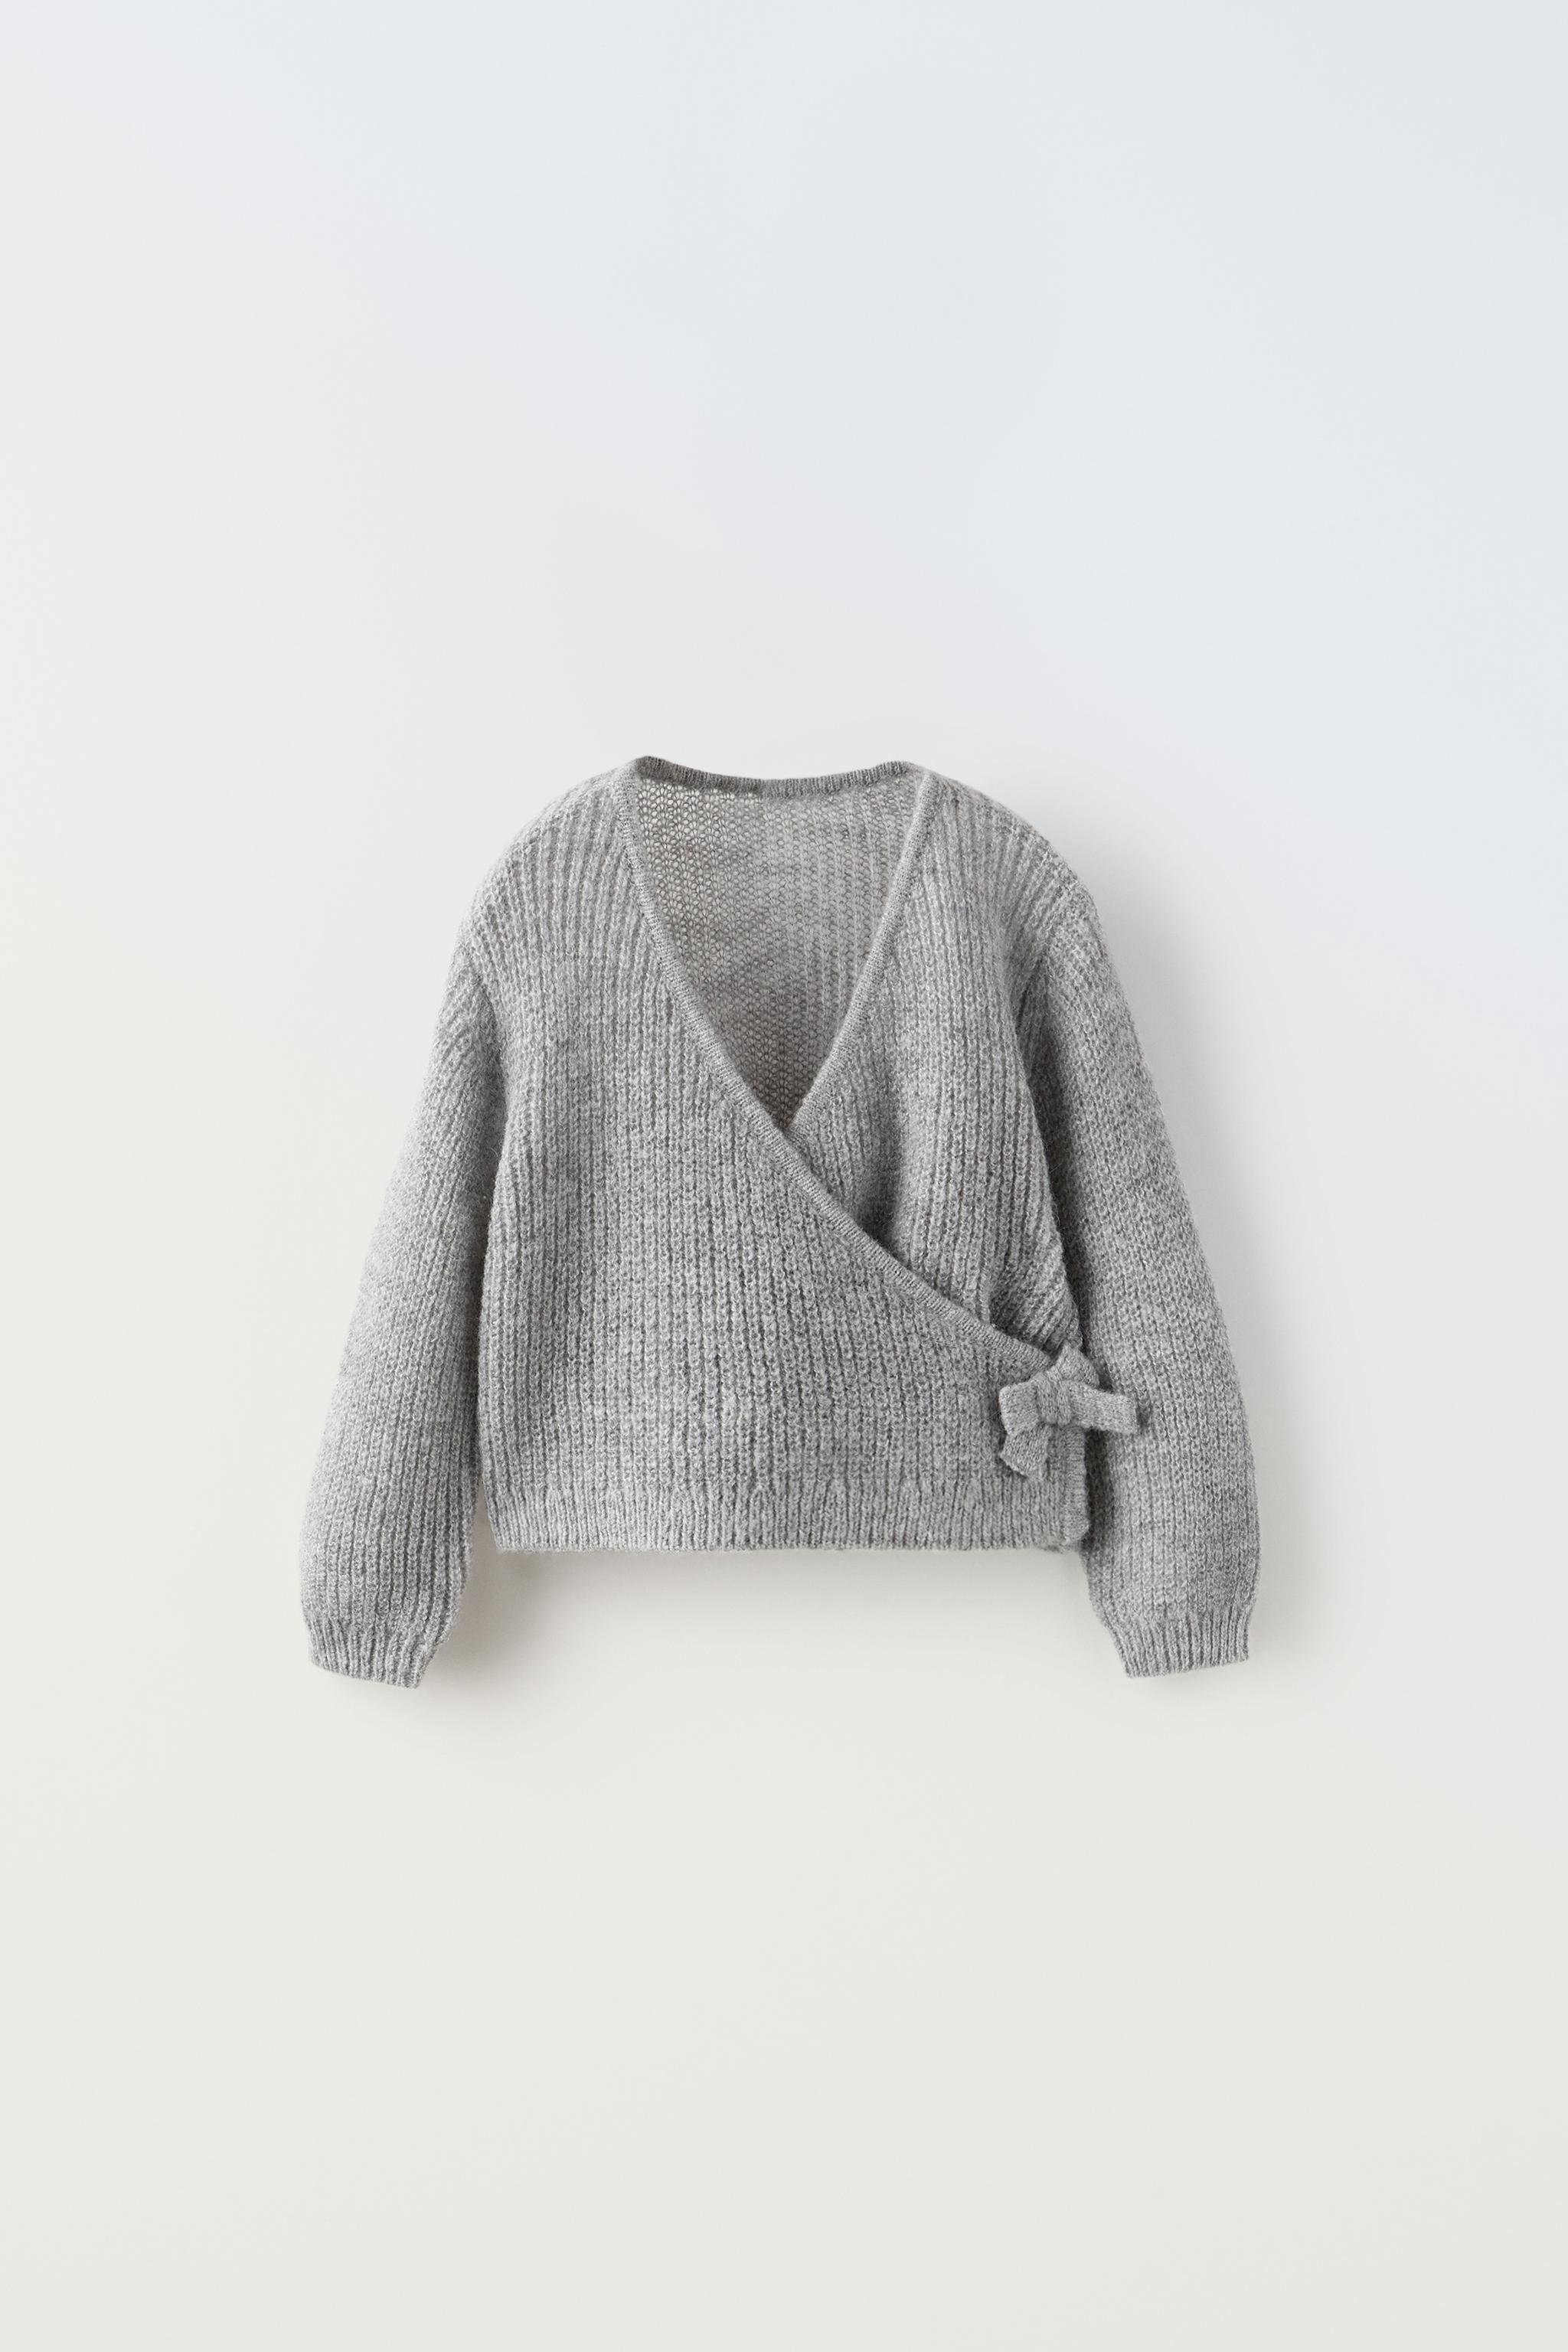 WRAP FRONT KNIT CARDIGAN